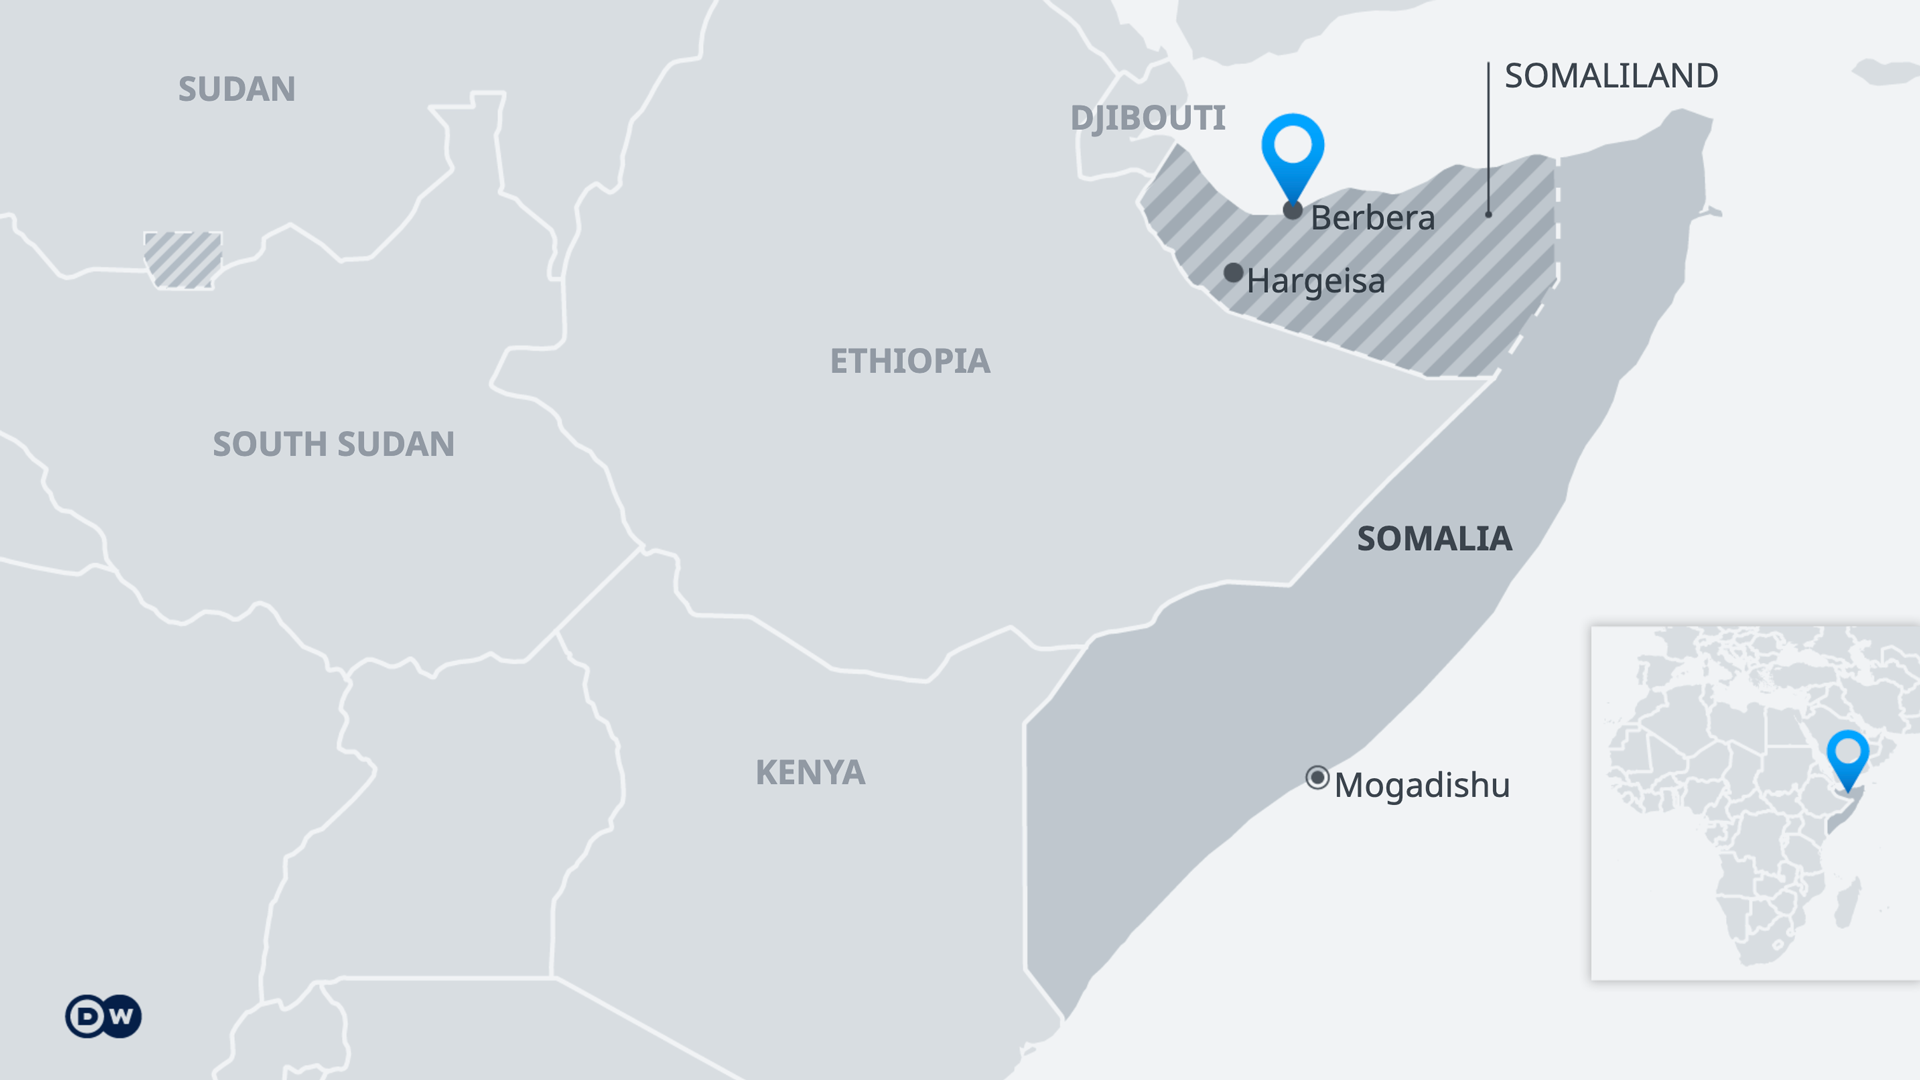 Map showing the location of Somaliland and the Port of Berbera in the Horn of Africa (source: DW)